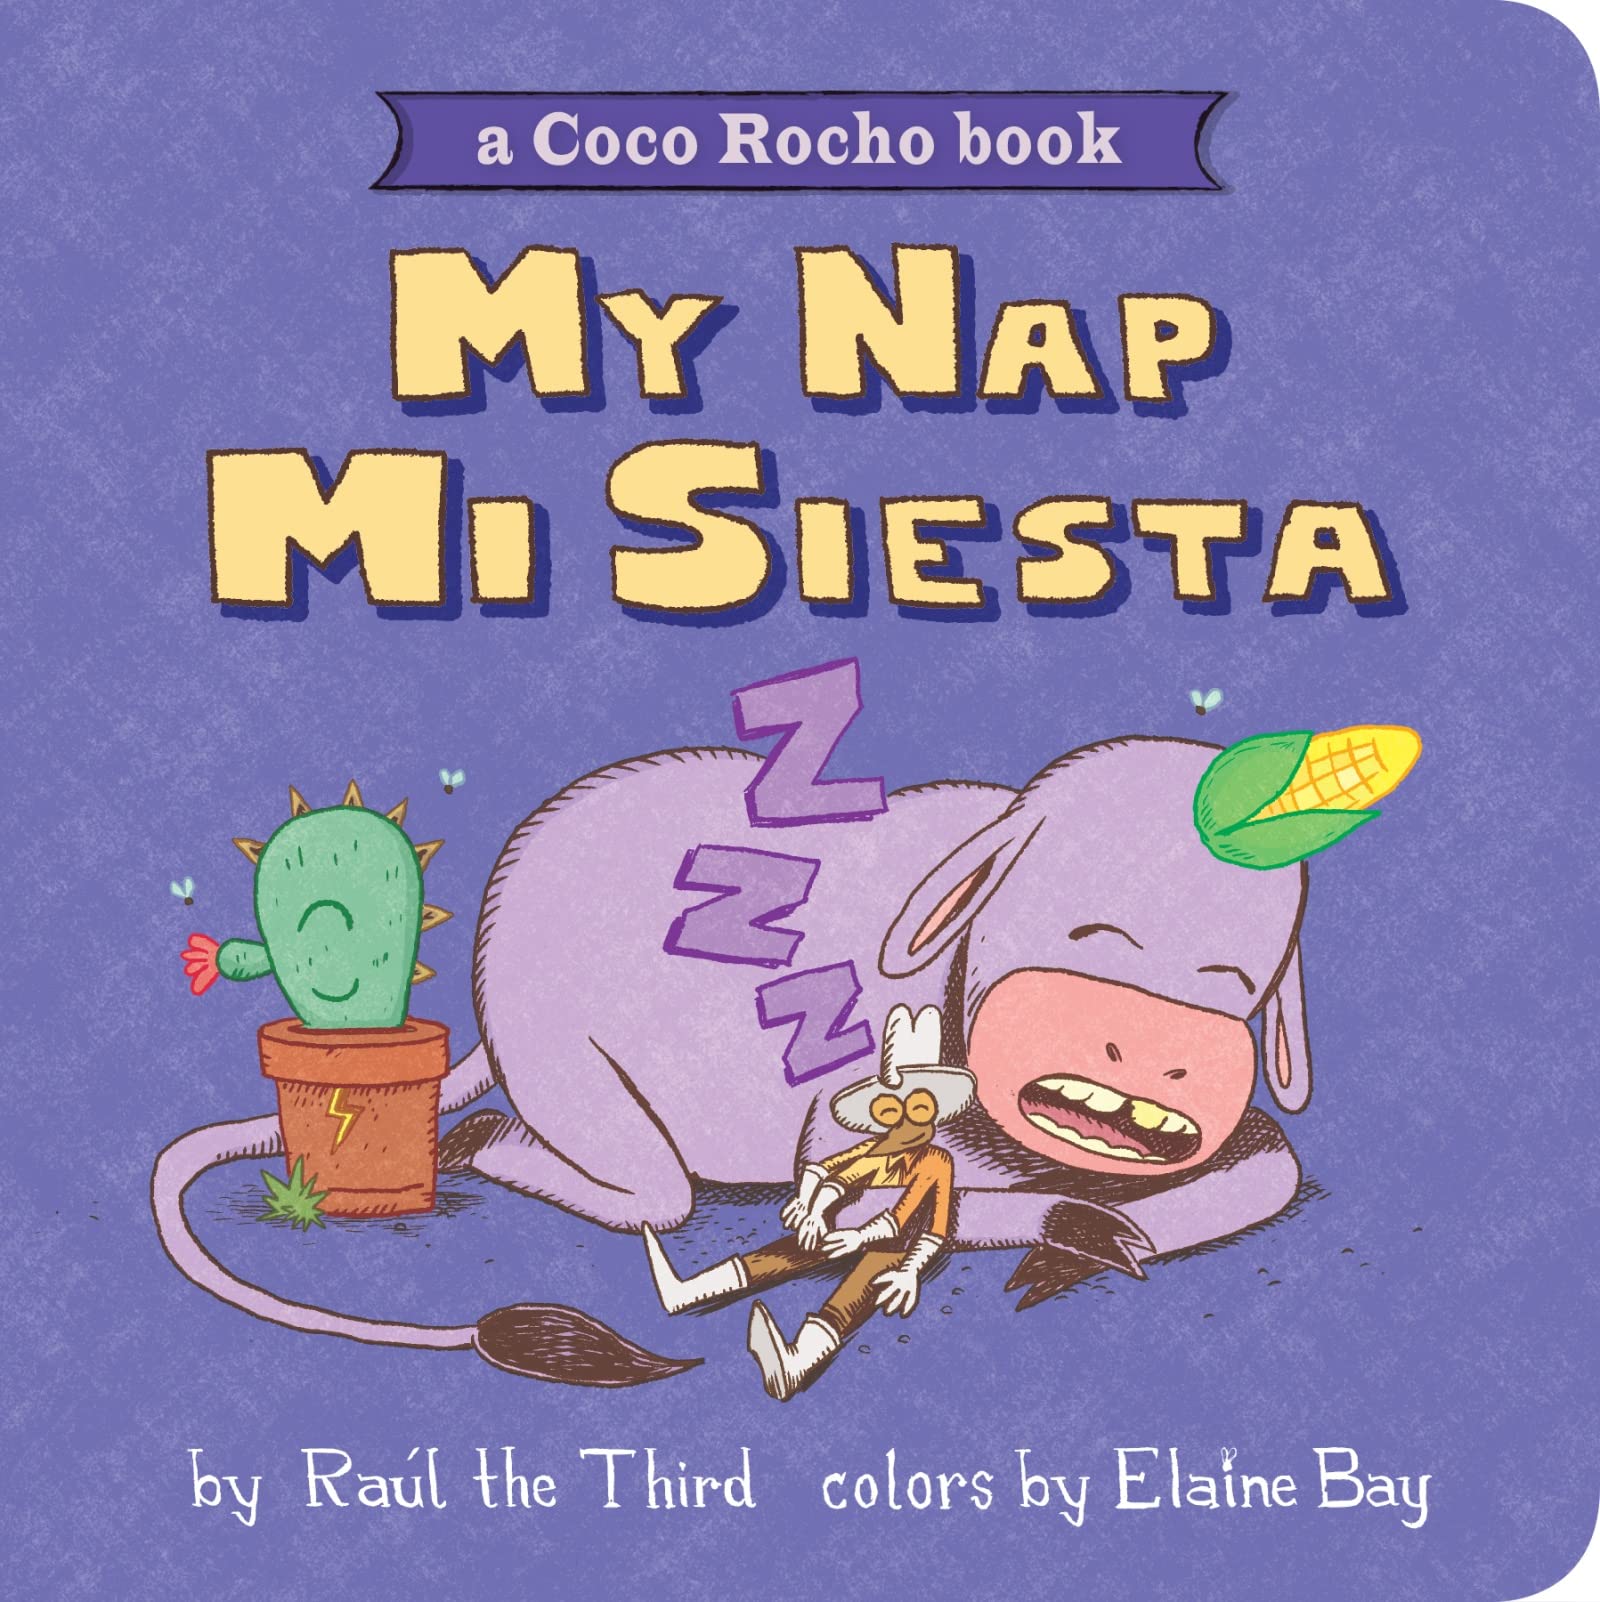 Three characters sleep on a purple background on the cover of the book My Nap = Mi Siesta.  A cockroach in western wear--including a white cowboy hat and matching boots, sleeps in the crook of a light purple donkey's arm.  The donkey has an ear of corn on his head and his tail is wrapped around a flowering Nopal cactus in a pot.  